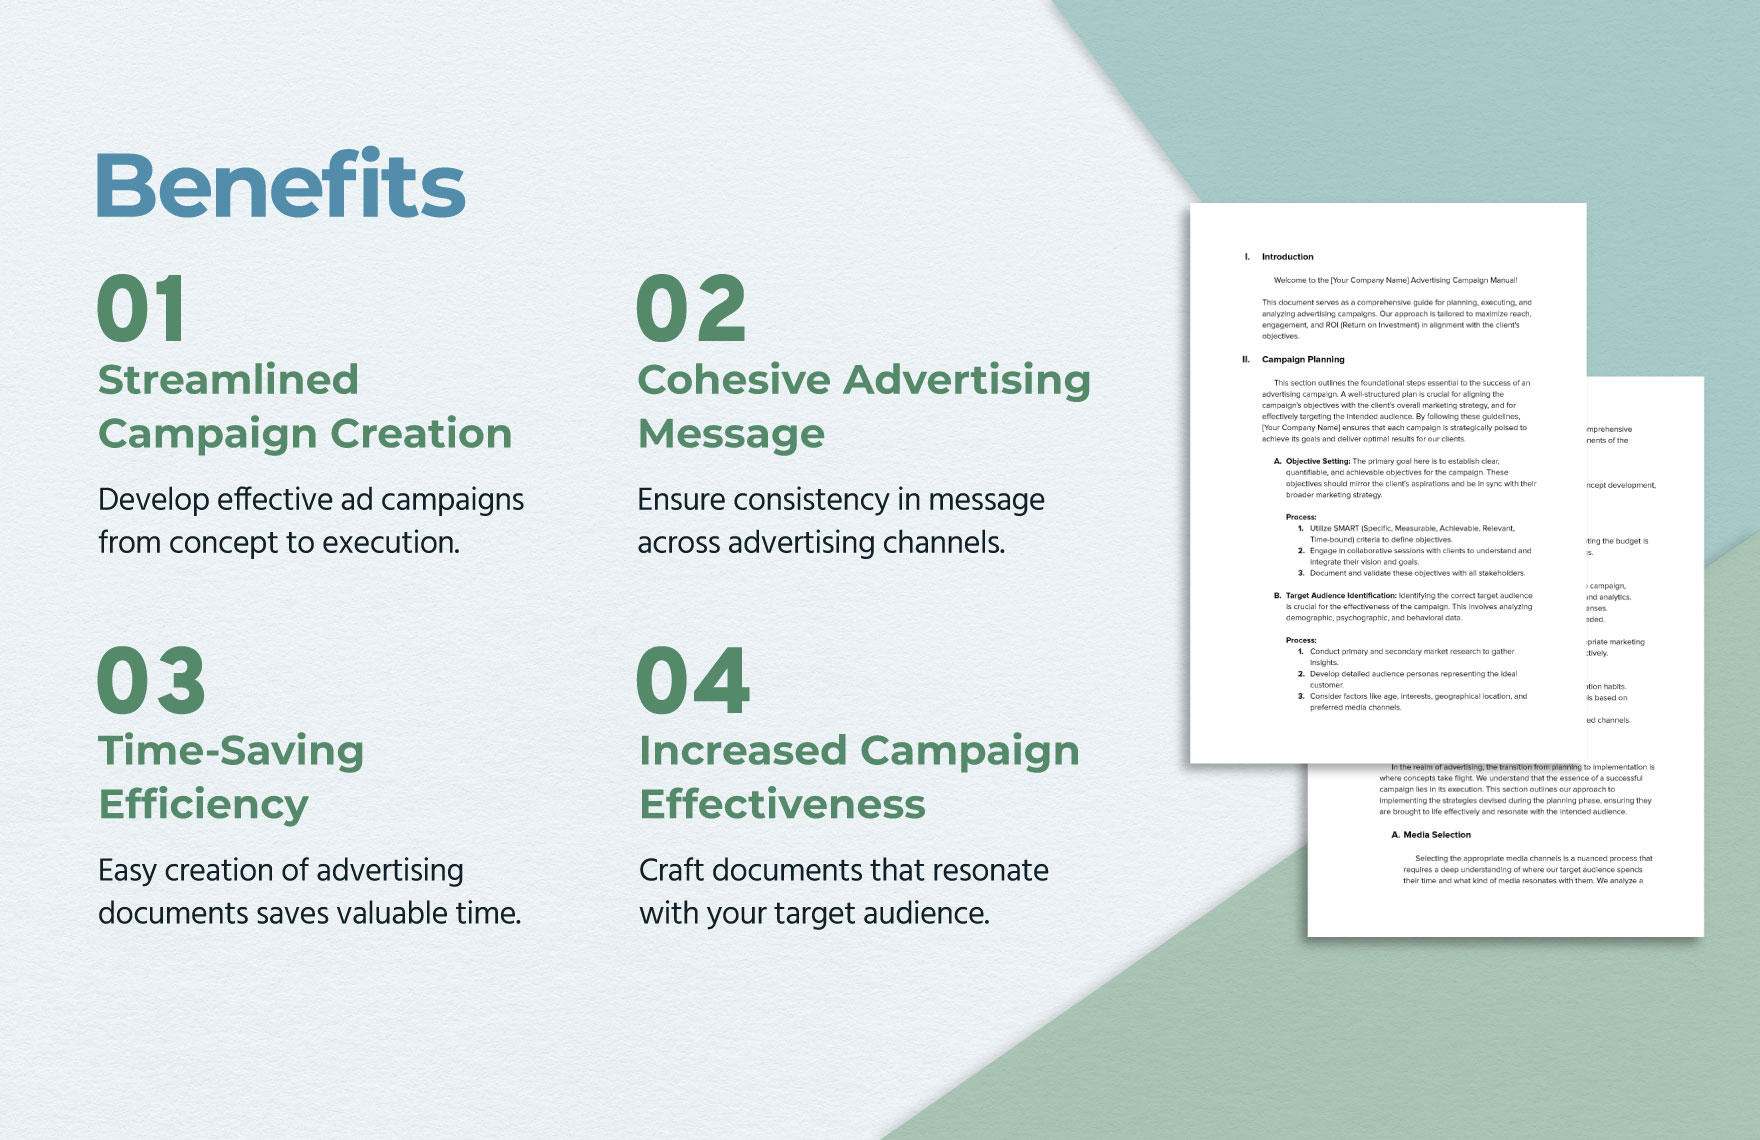 Advertising Campaign Manual Template